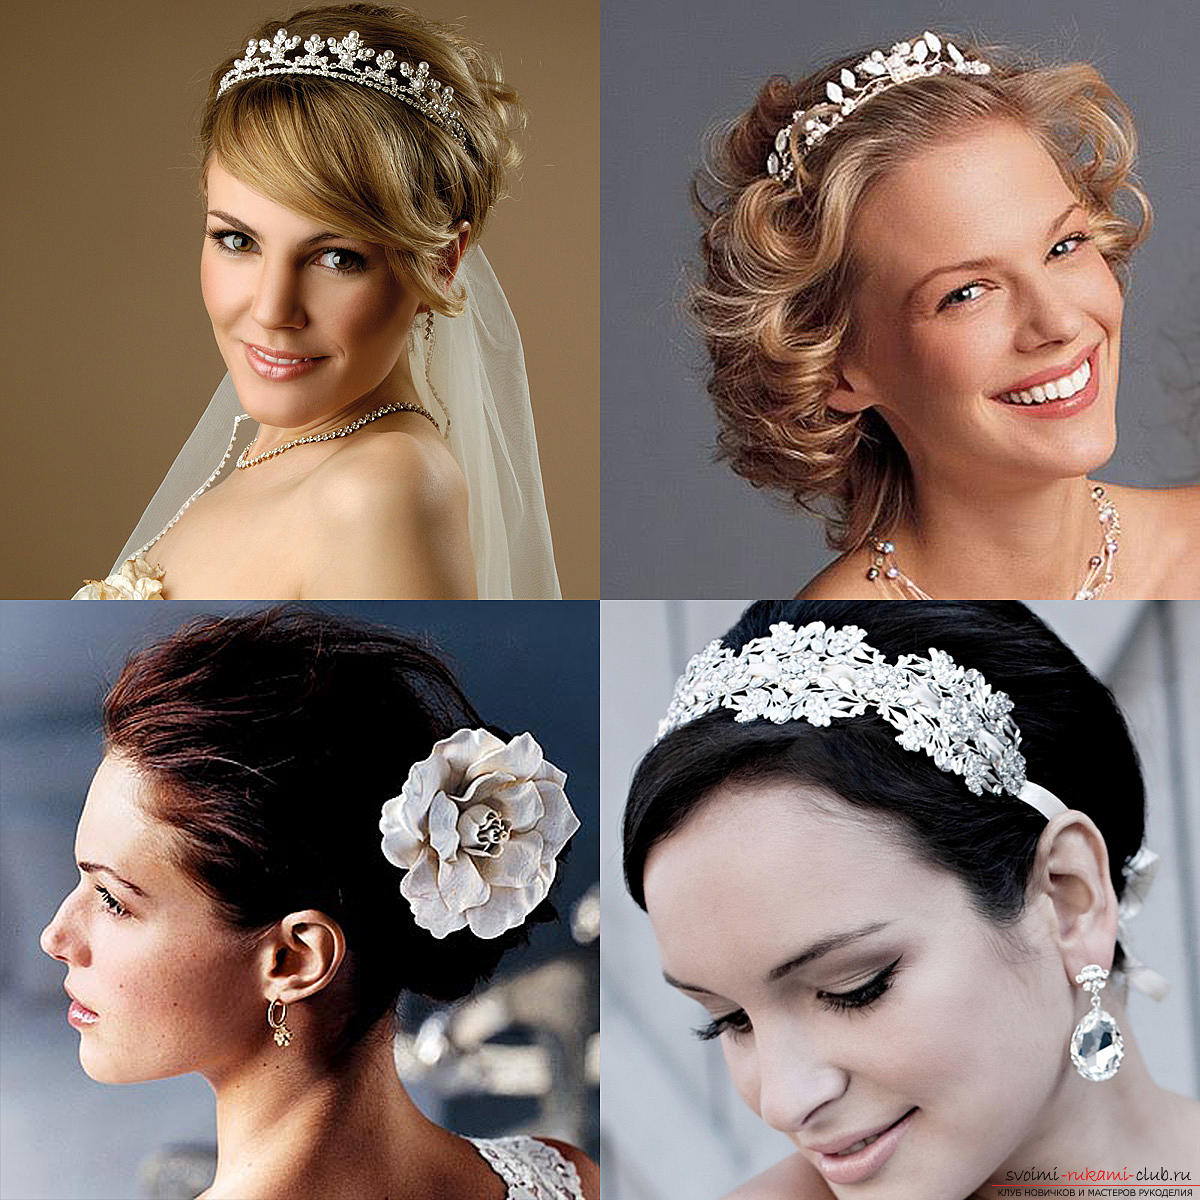 Hairstyles for brides for short hair. Photo №7